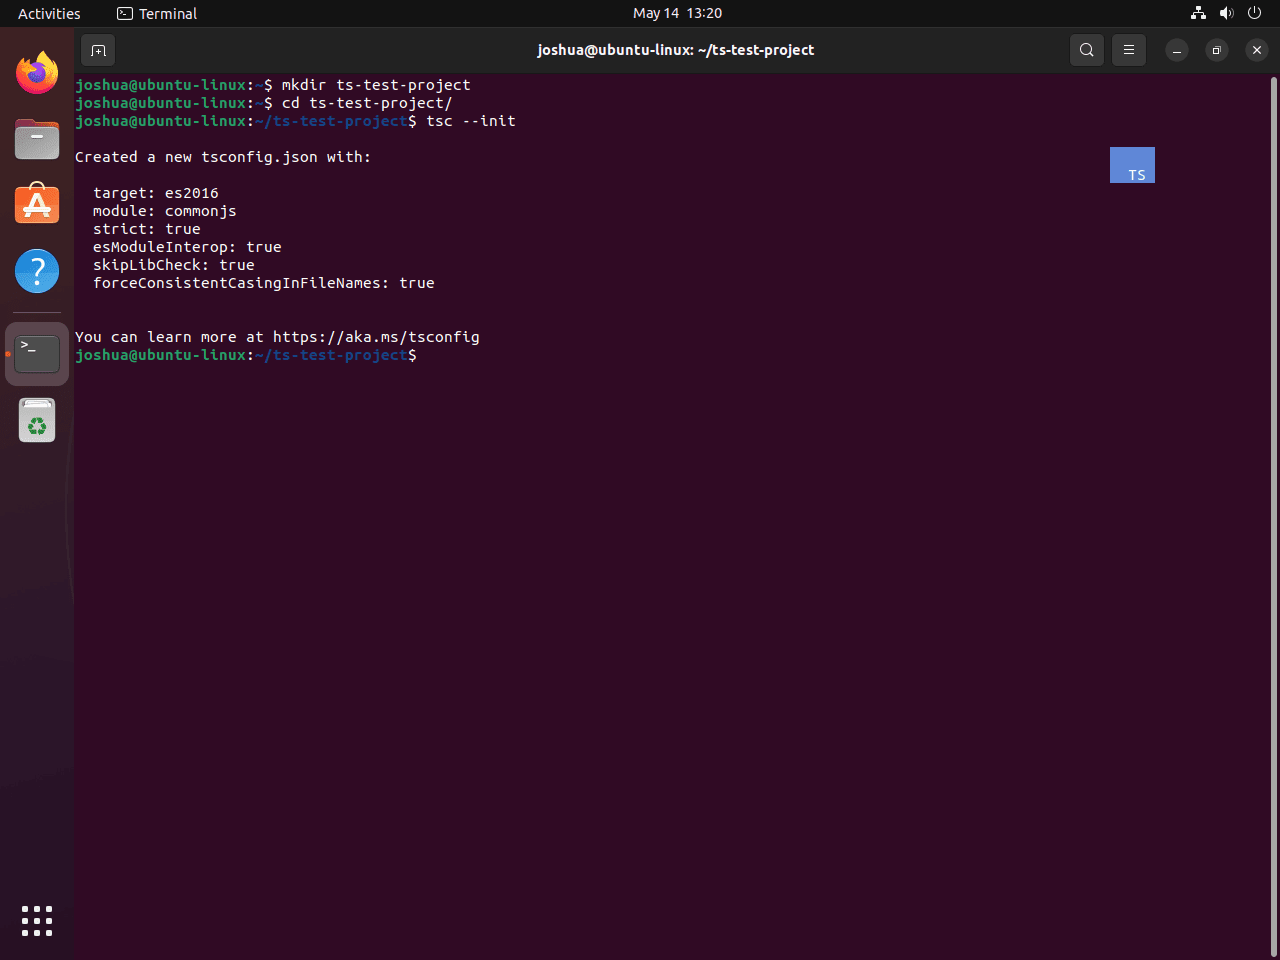 example of init command with typescript on ubuntu linux for test project